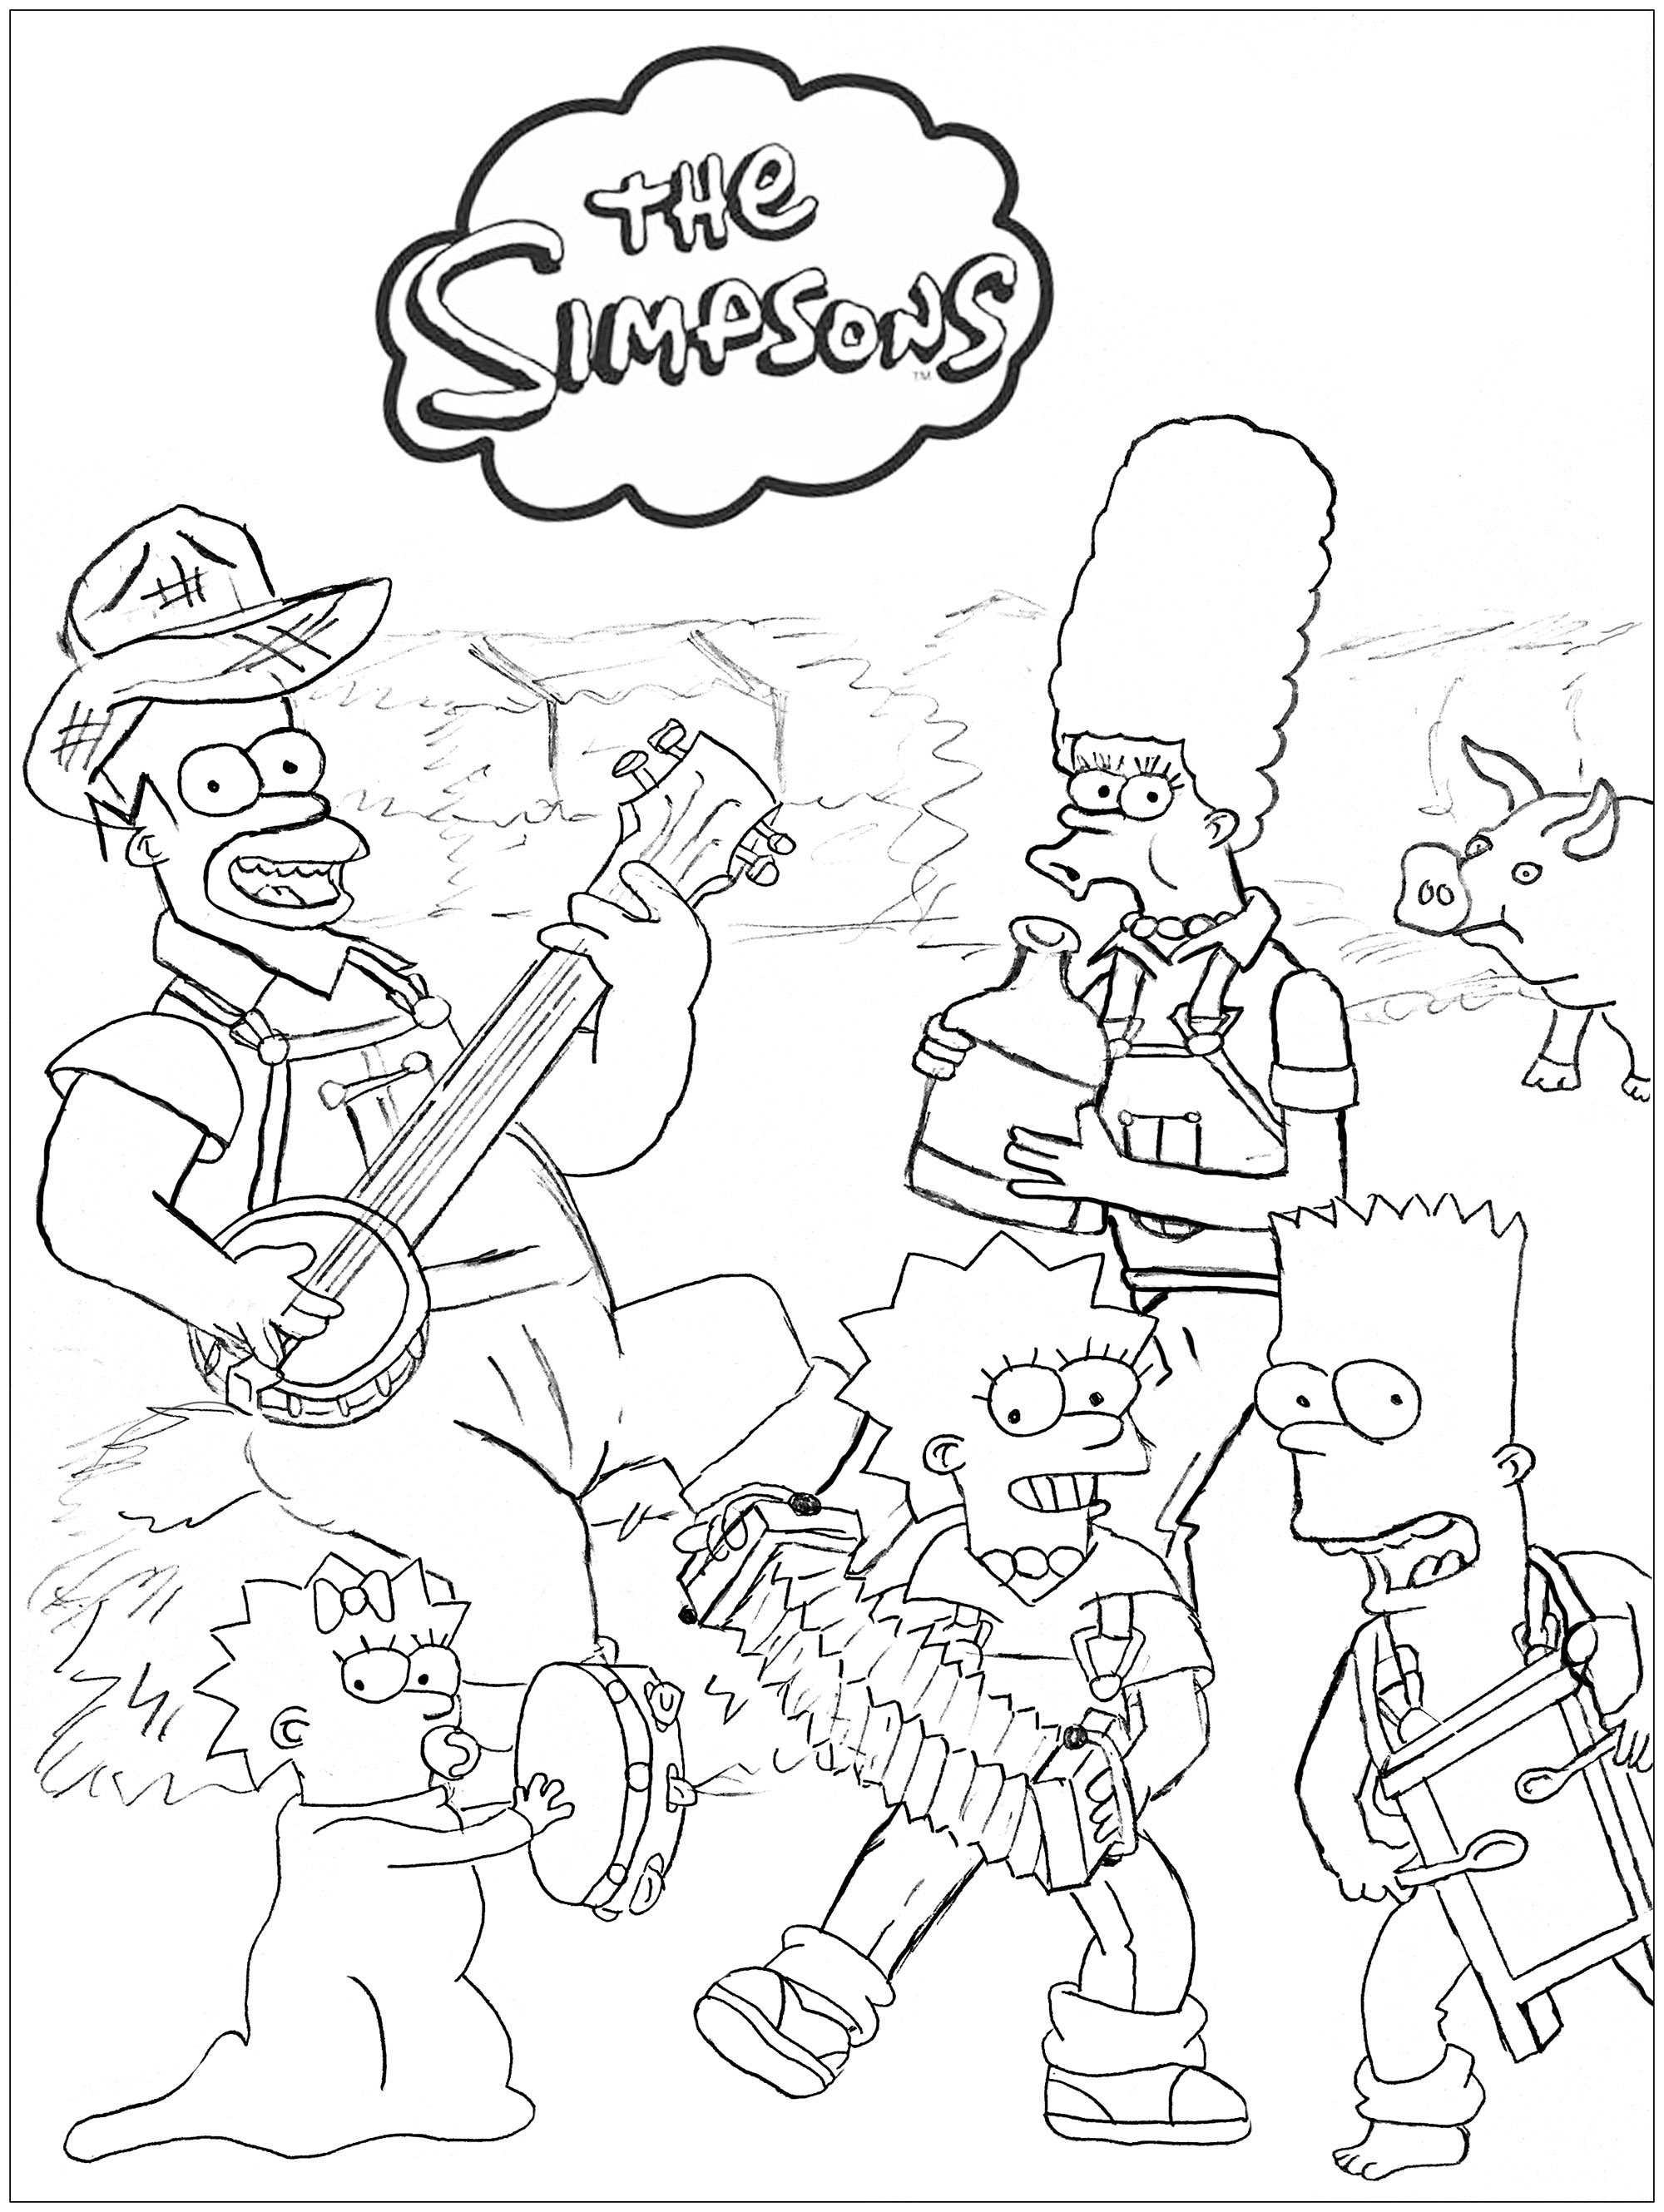 Image of The Simpsons to print and color - The Simpsons Kids Coloring Pages